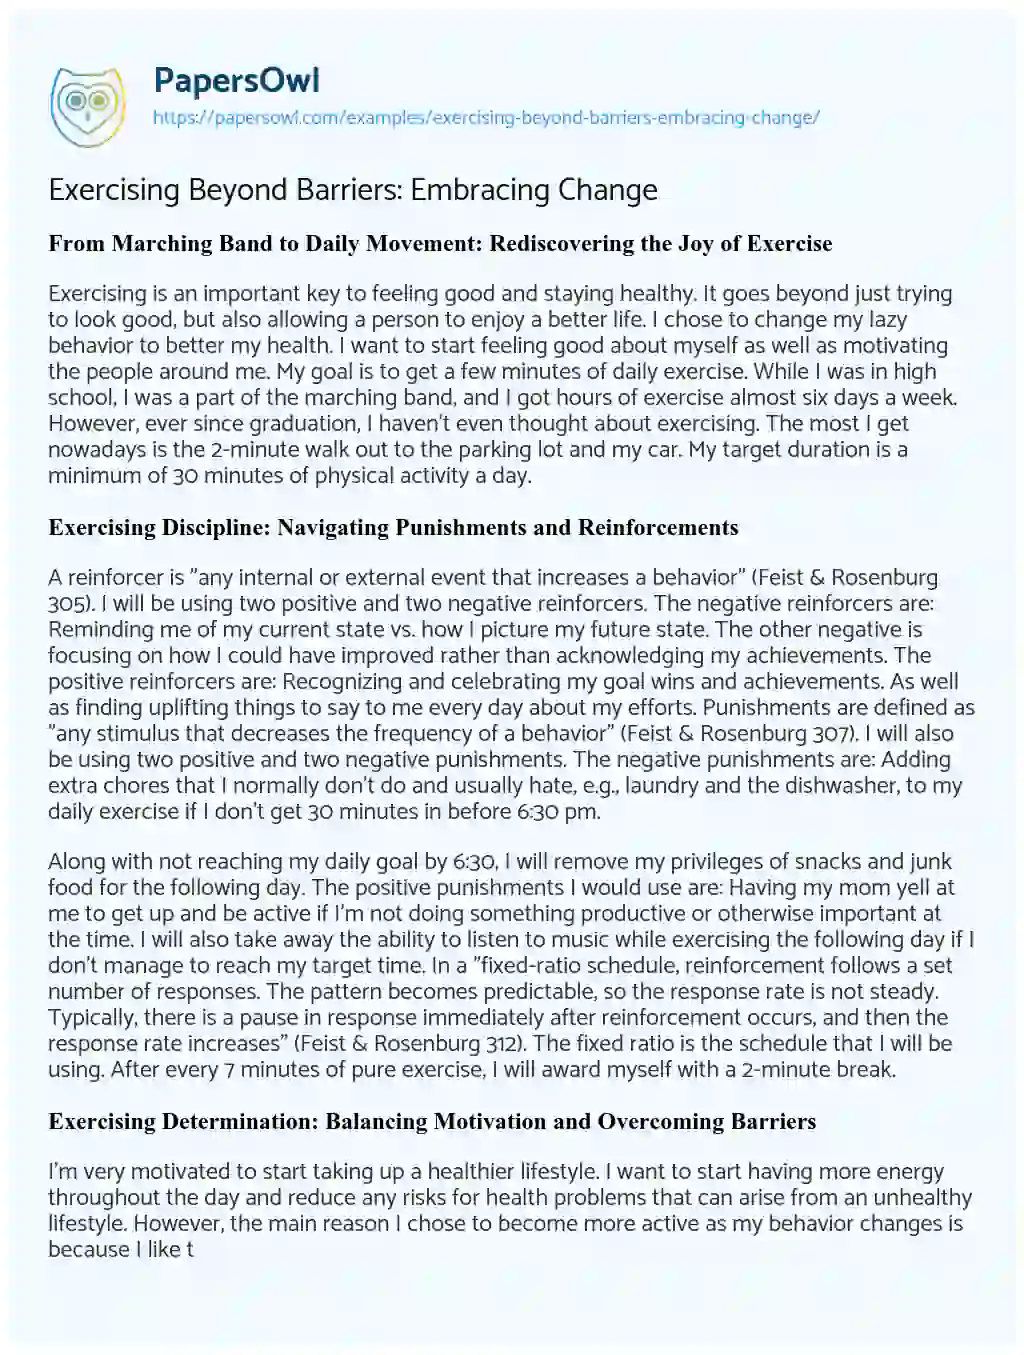 Essay on Exercising Beyond Barriers: Embracing Change